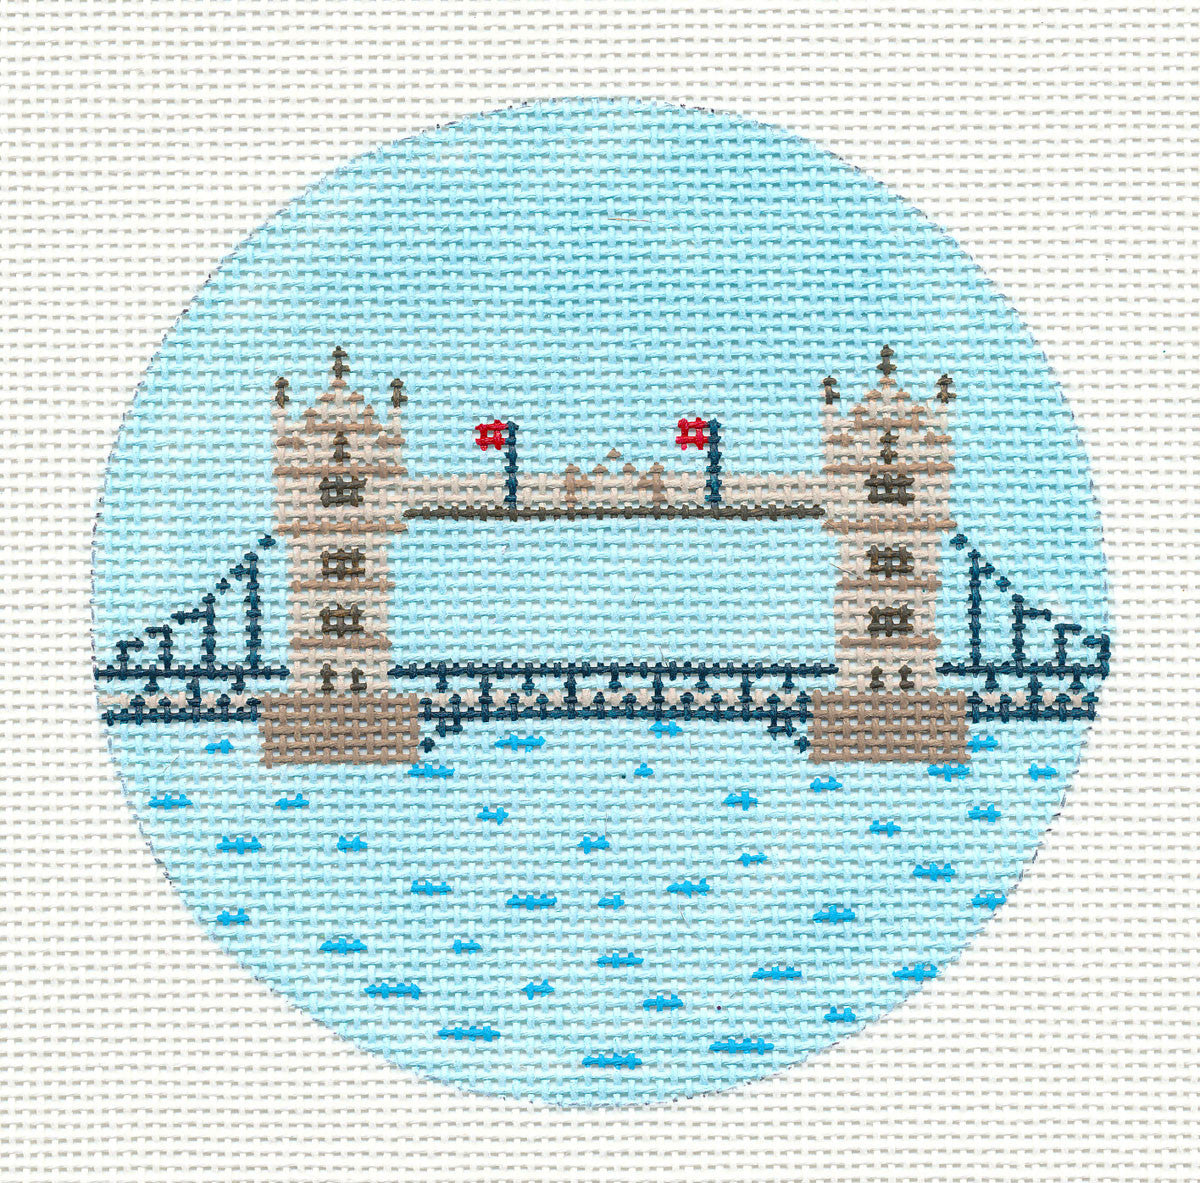 Travel Round ~ London, England Destination 4" round handpainted Needlepoint Canvas by Painted Pony